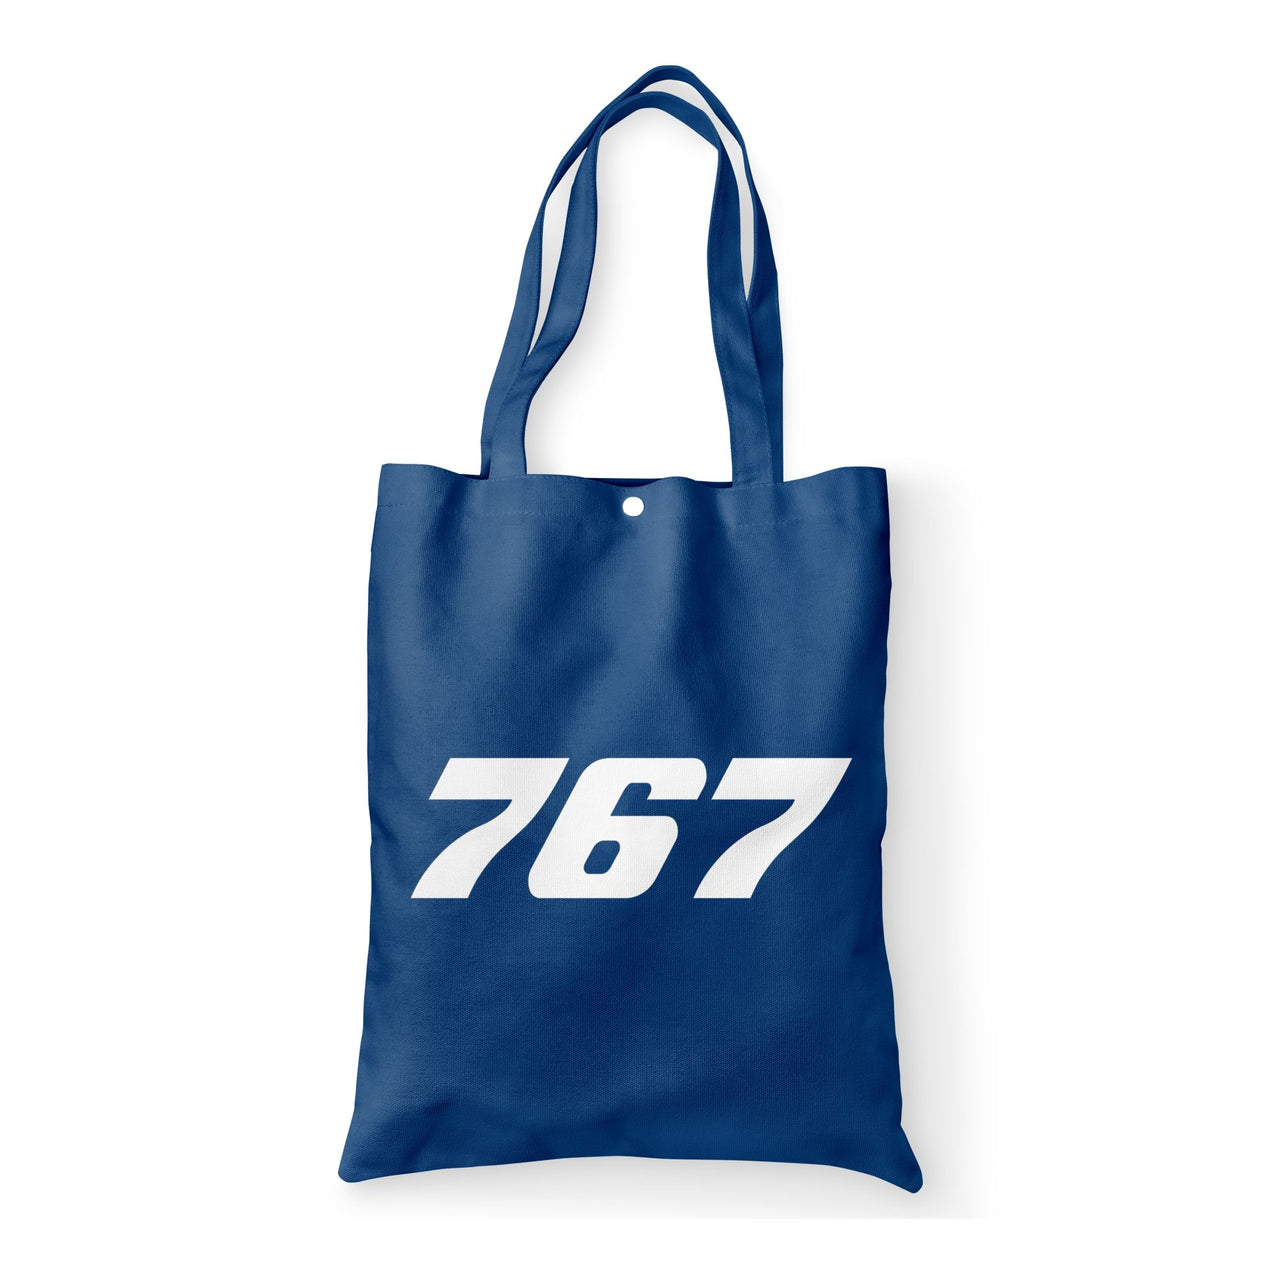 767 Flat Text Designed Tote Bags